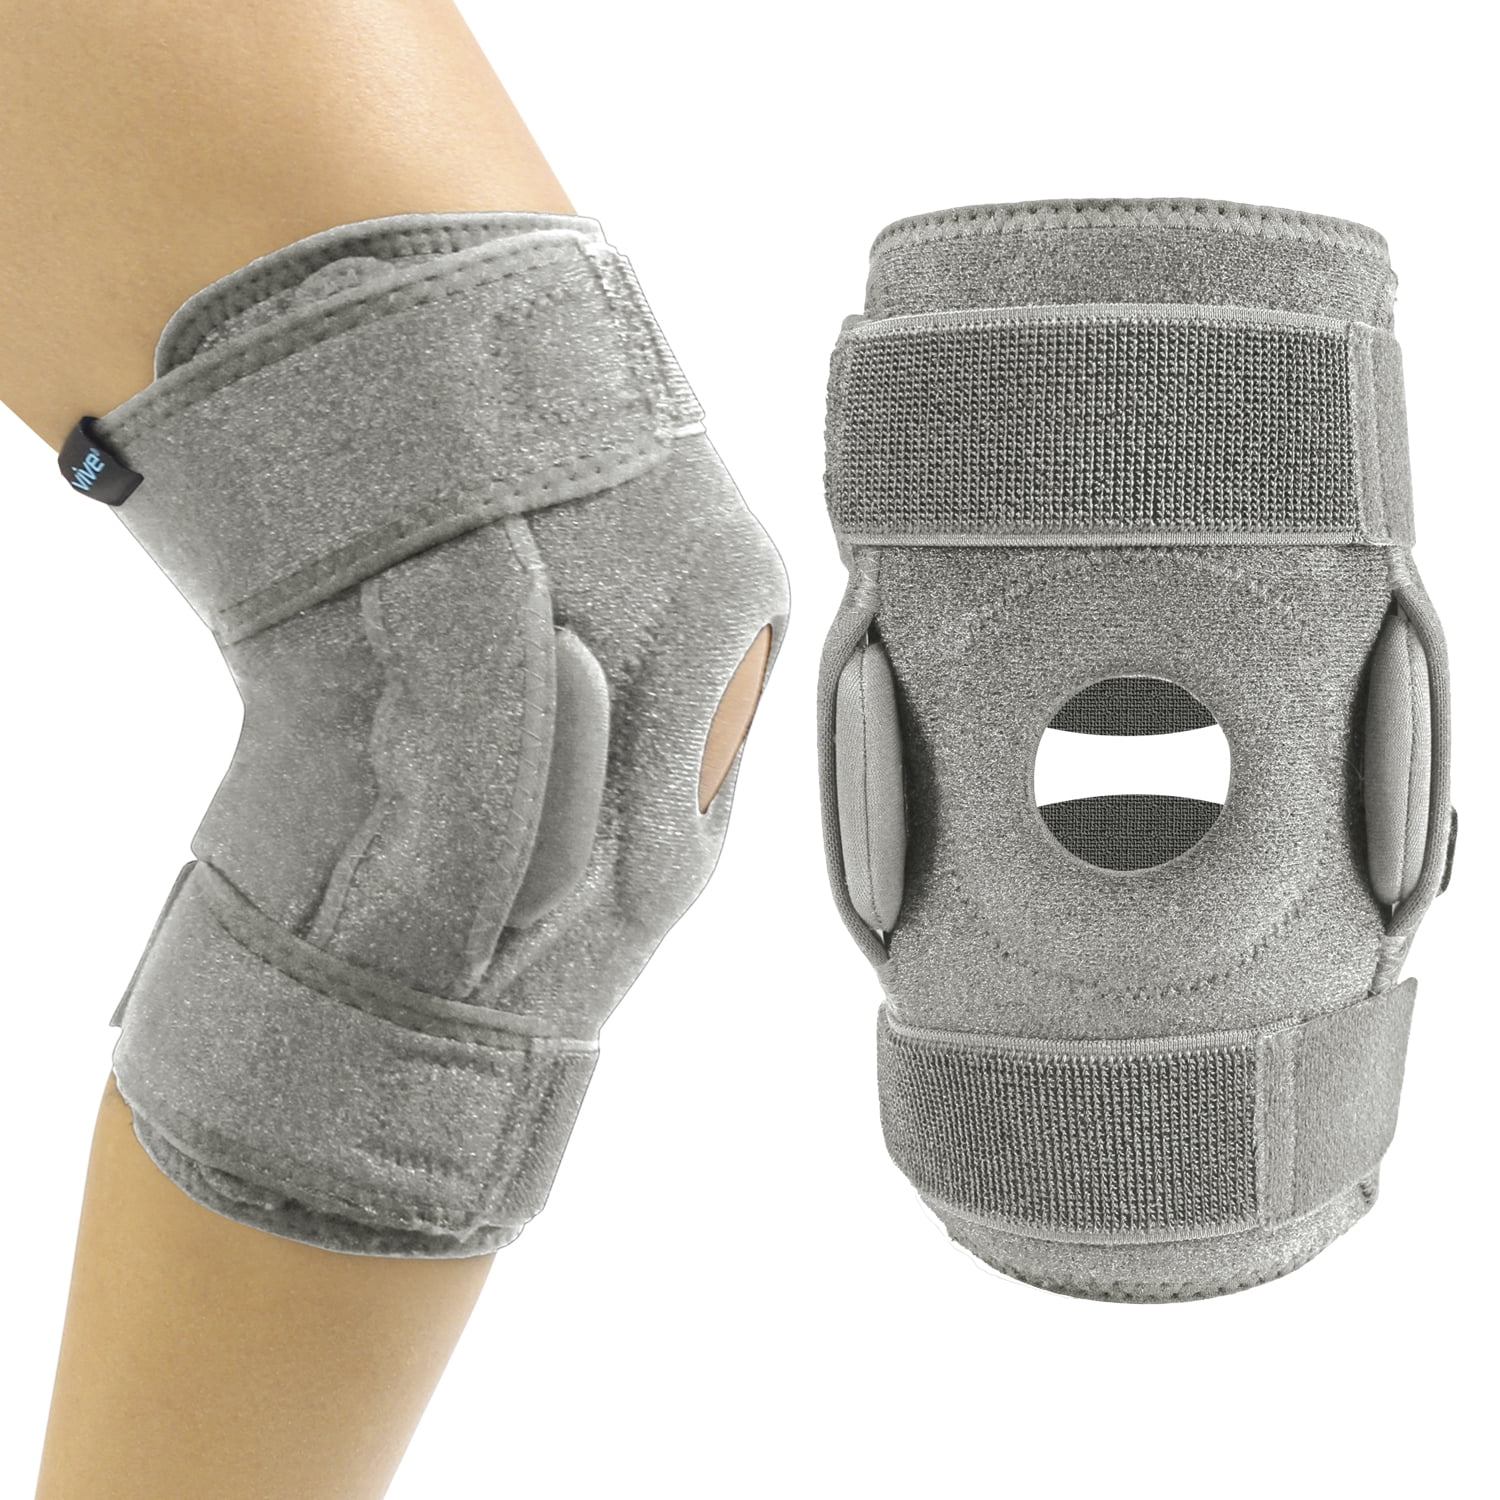 PRO 11 WELLBEING Hinged knee brace with patella support and adjustable straps